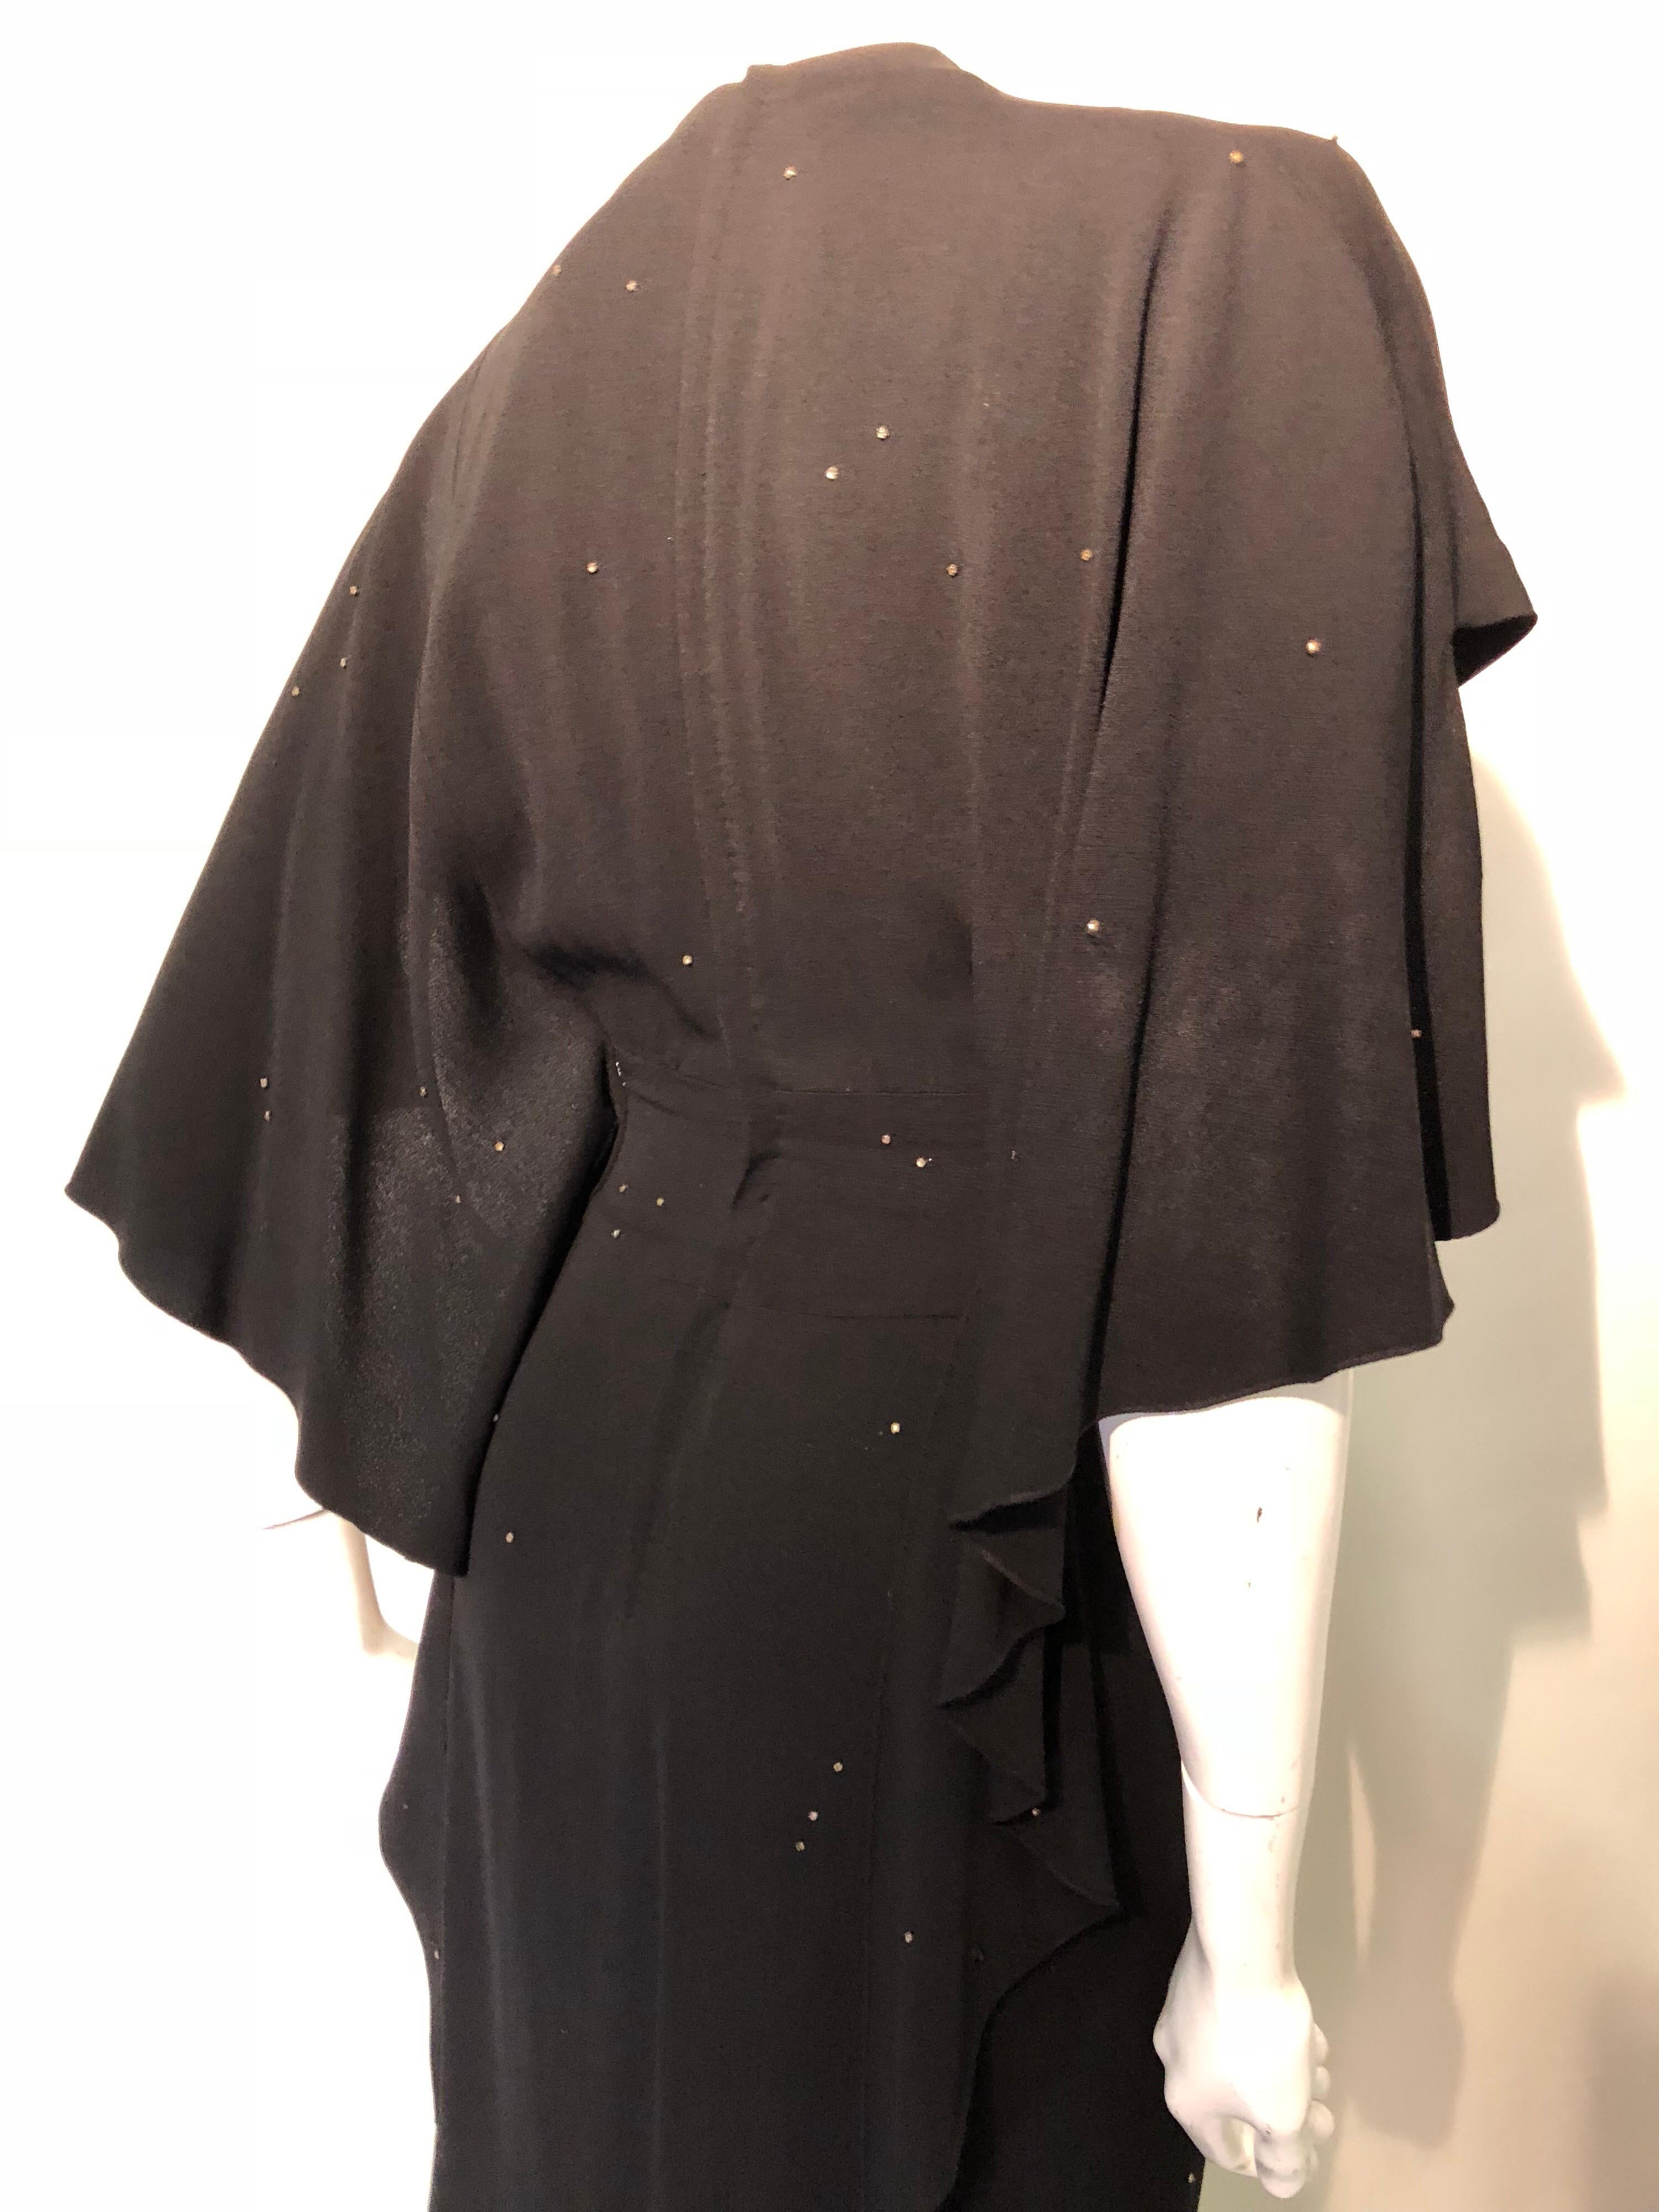 Gilbert Adrian Black Crepe Gown With Shoulder Drape / Back and Front Slit, 1940 For Sale 3